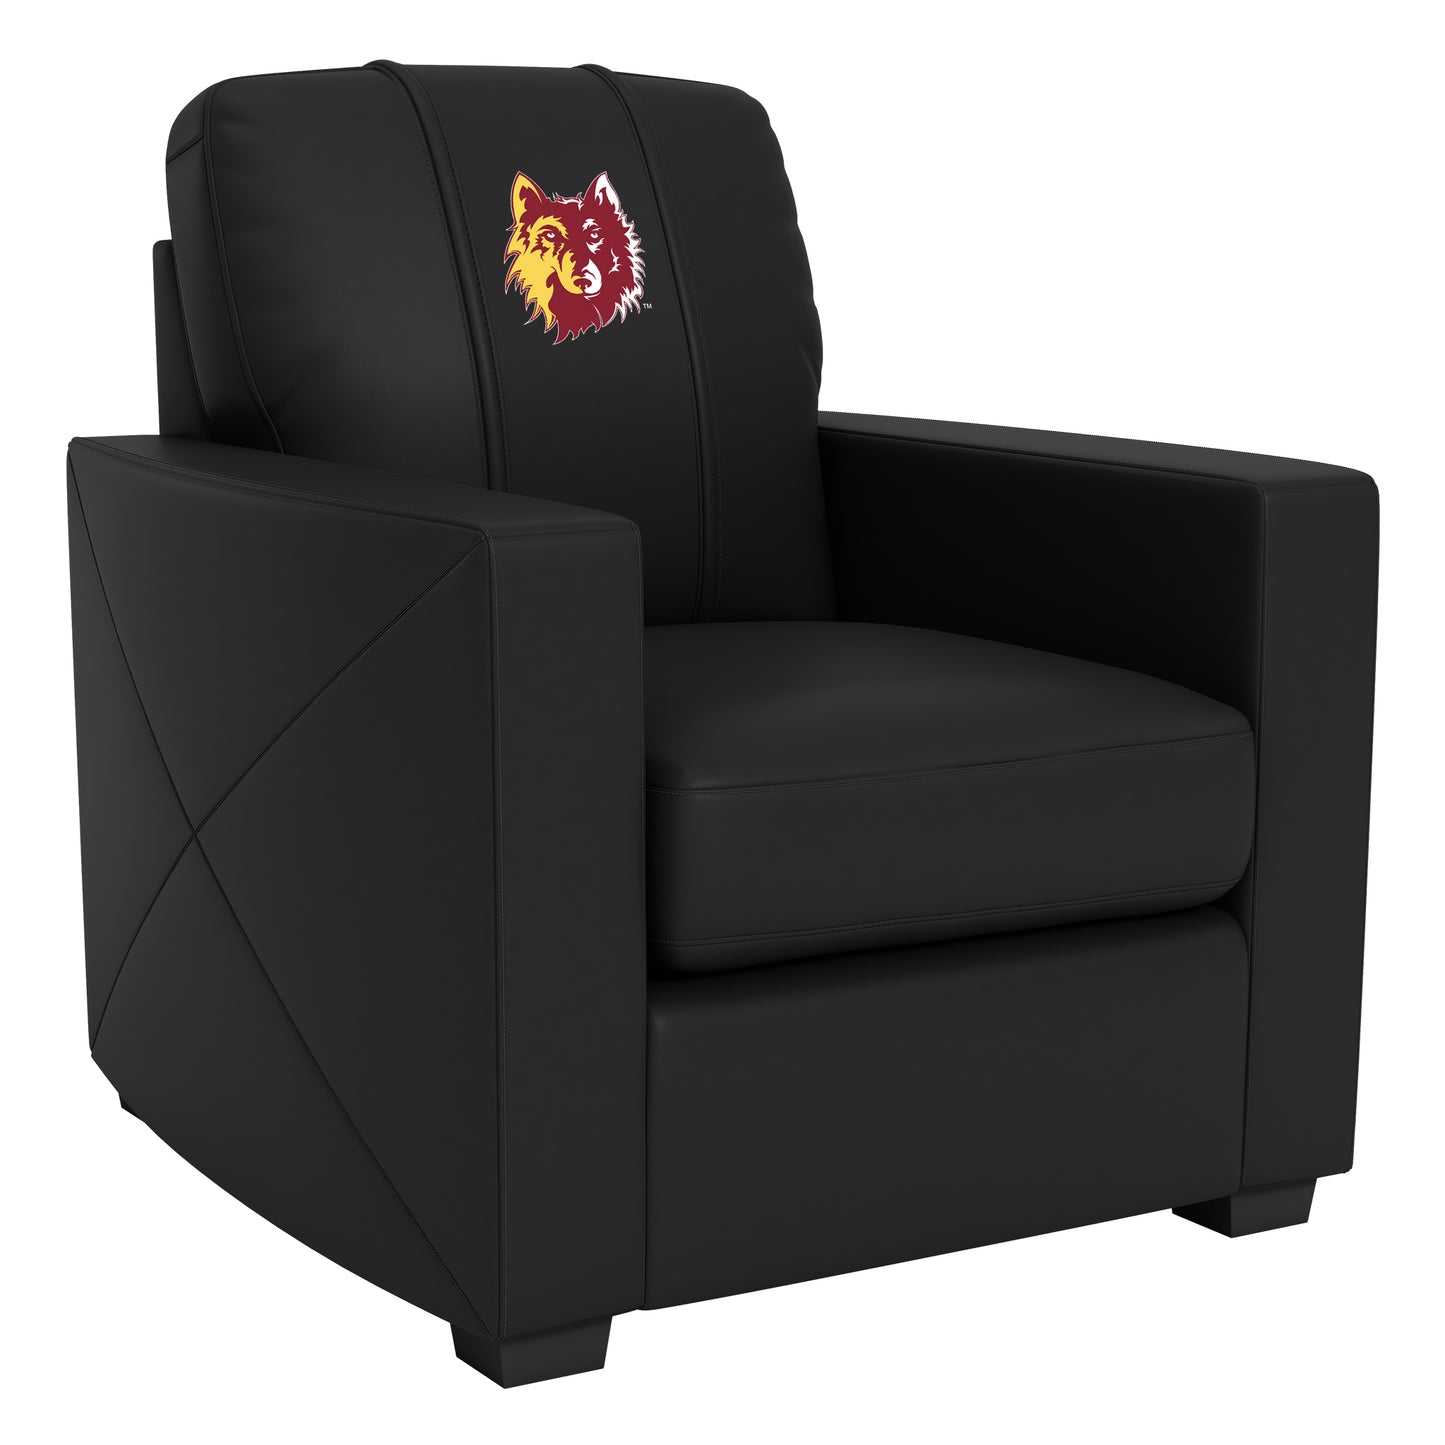 Silver Club Chair with Northern State Wolf Head Logo Panel